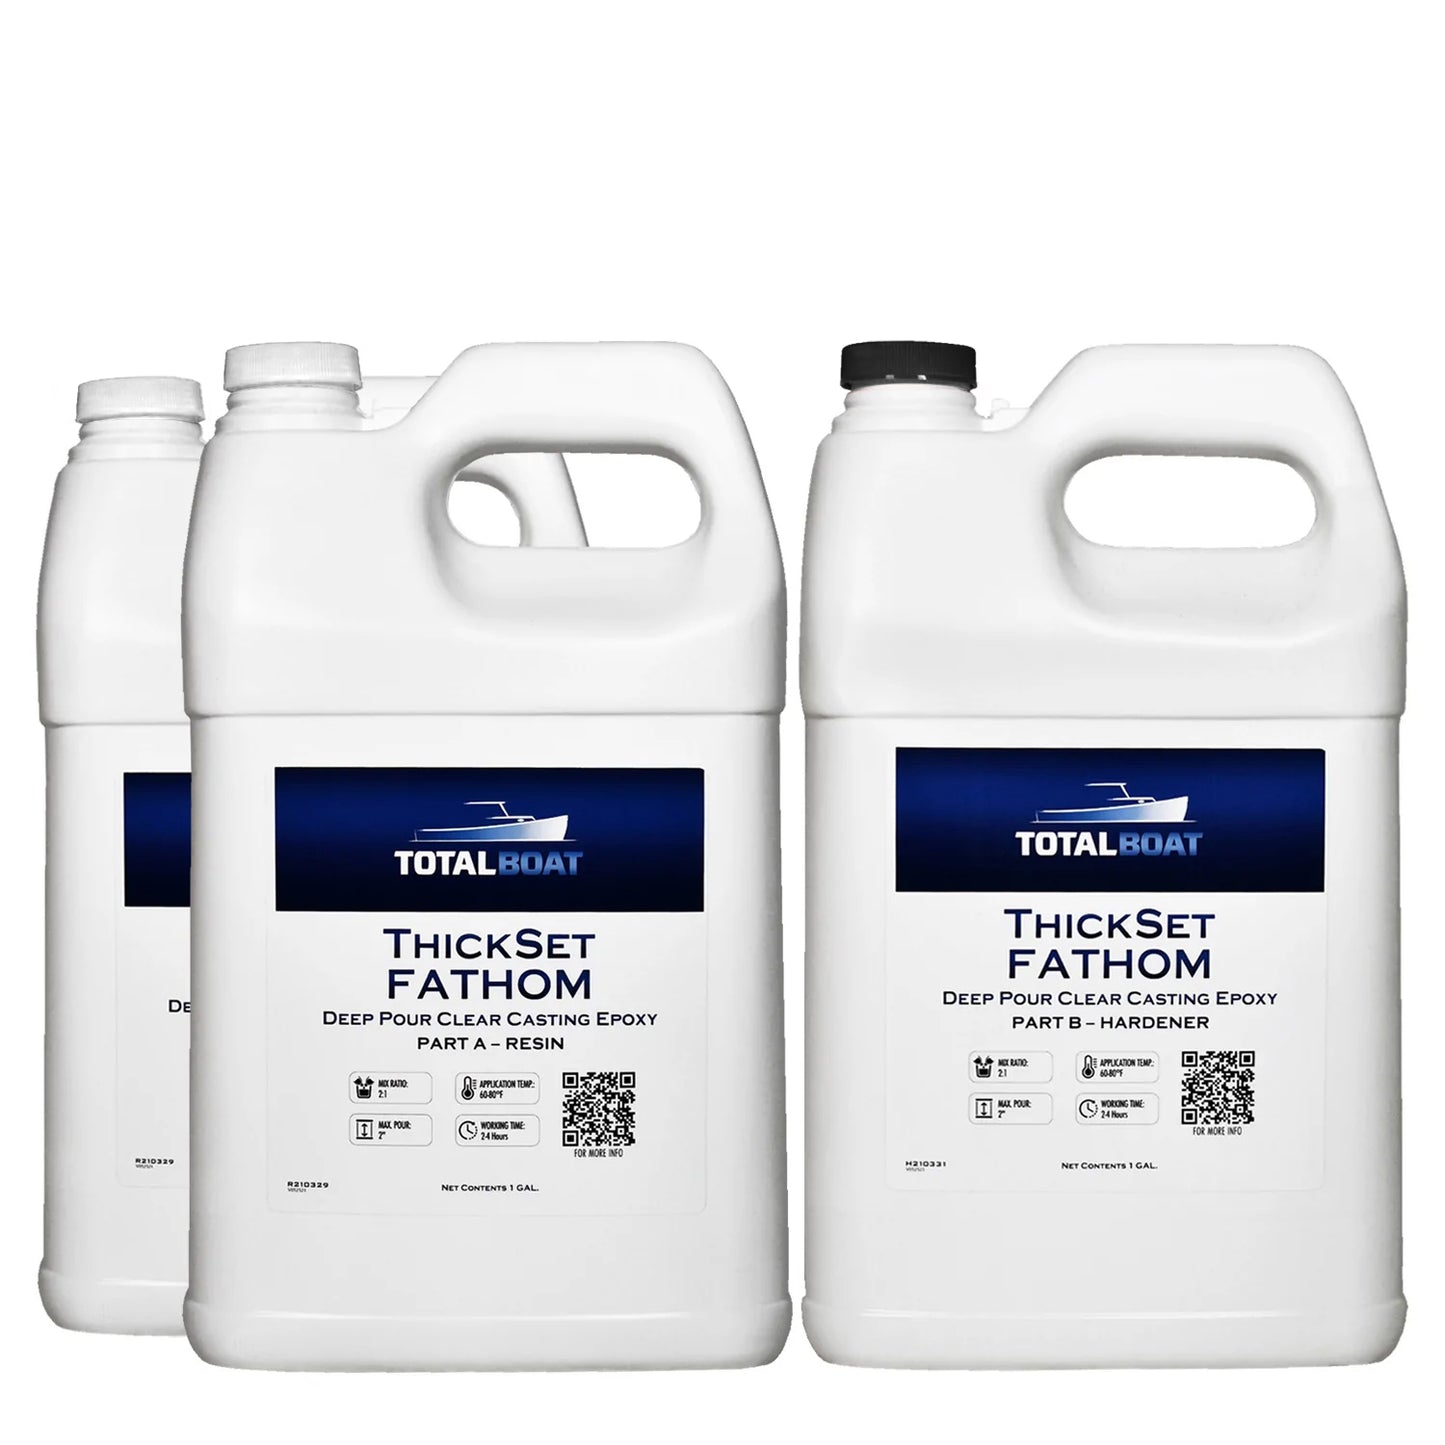 Let's Resin 1 Gallon Epoxy Resin Kit with Pumps, Resin Dye, and Mica Powder